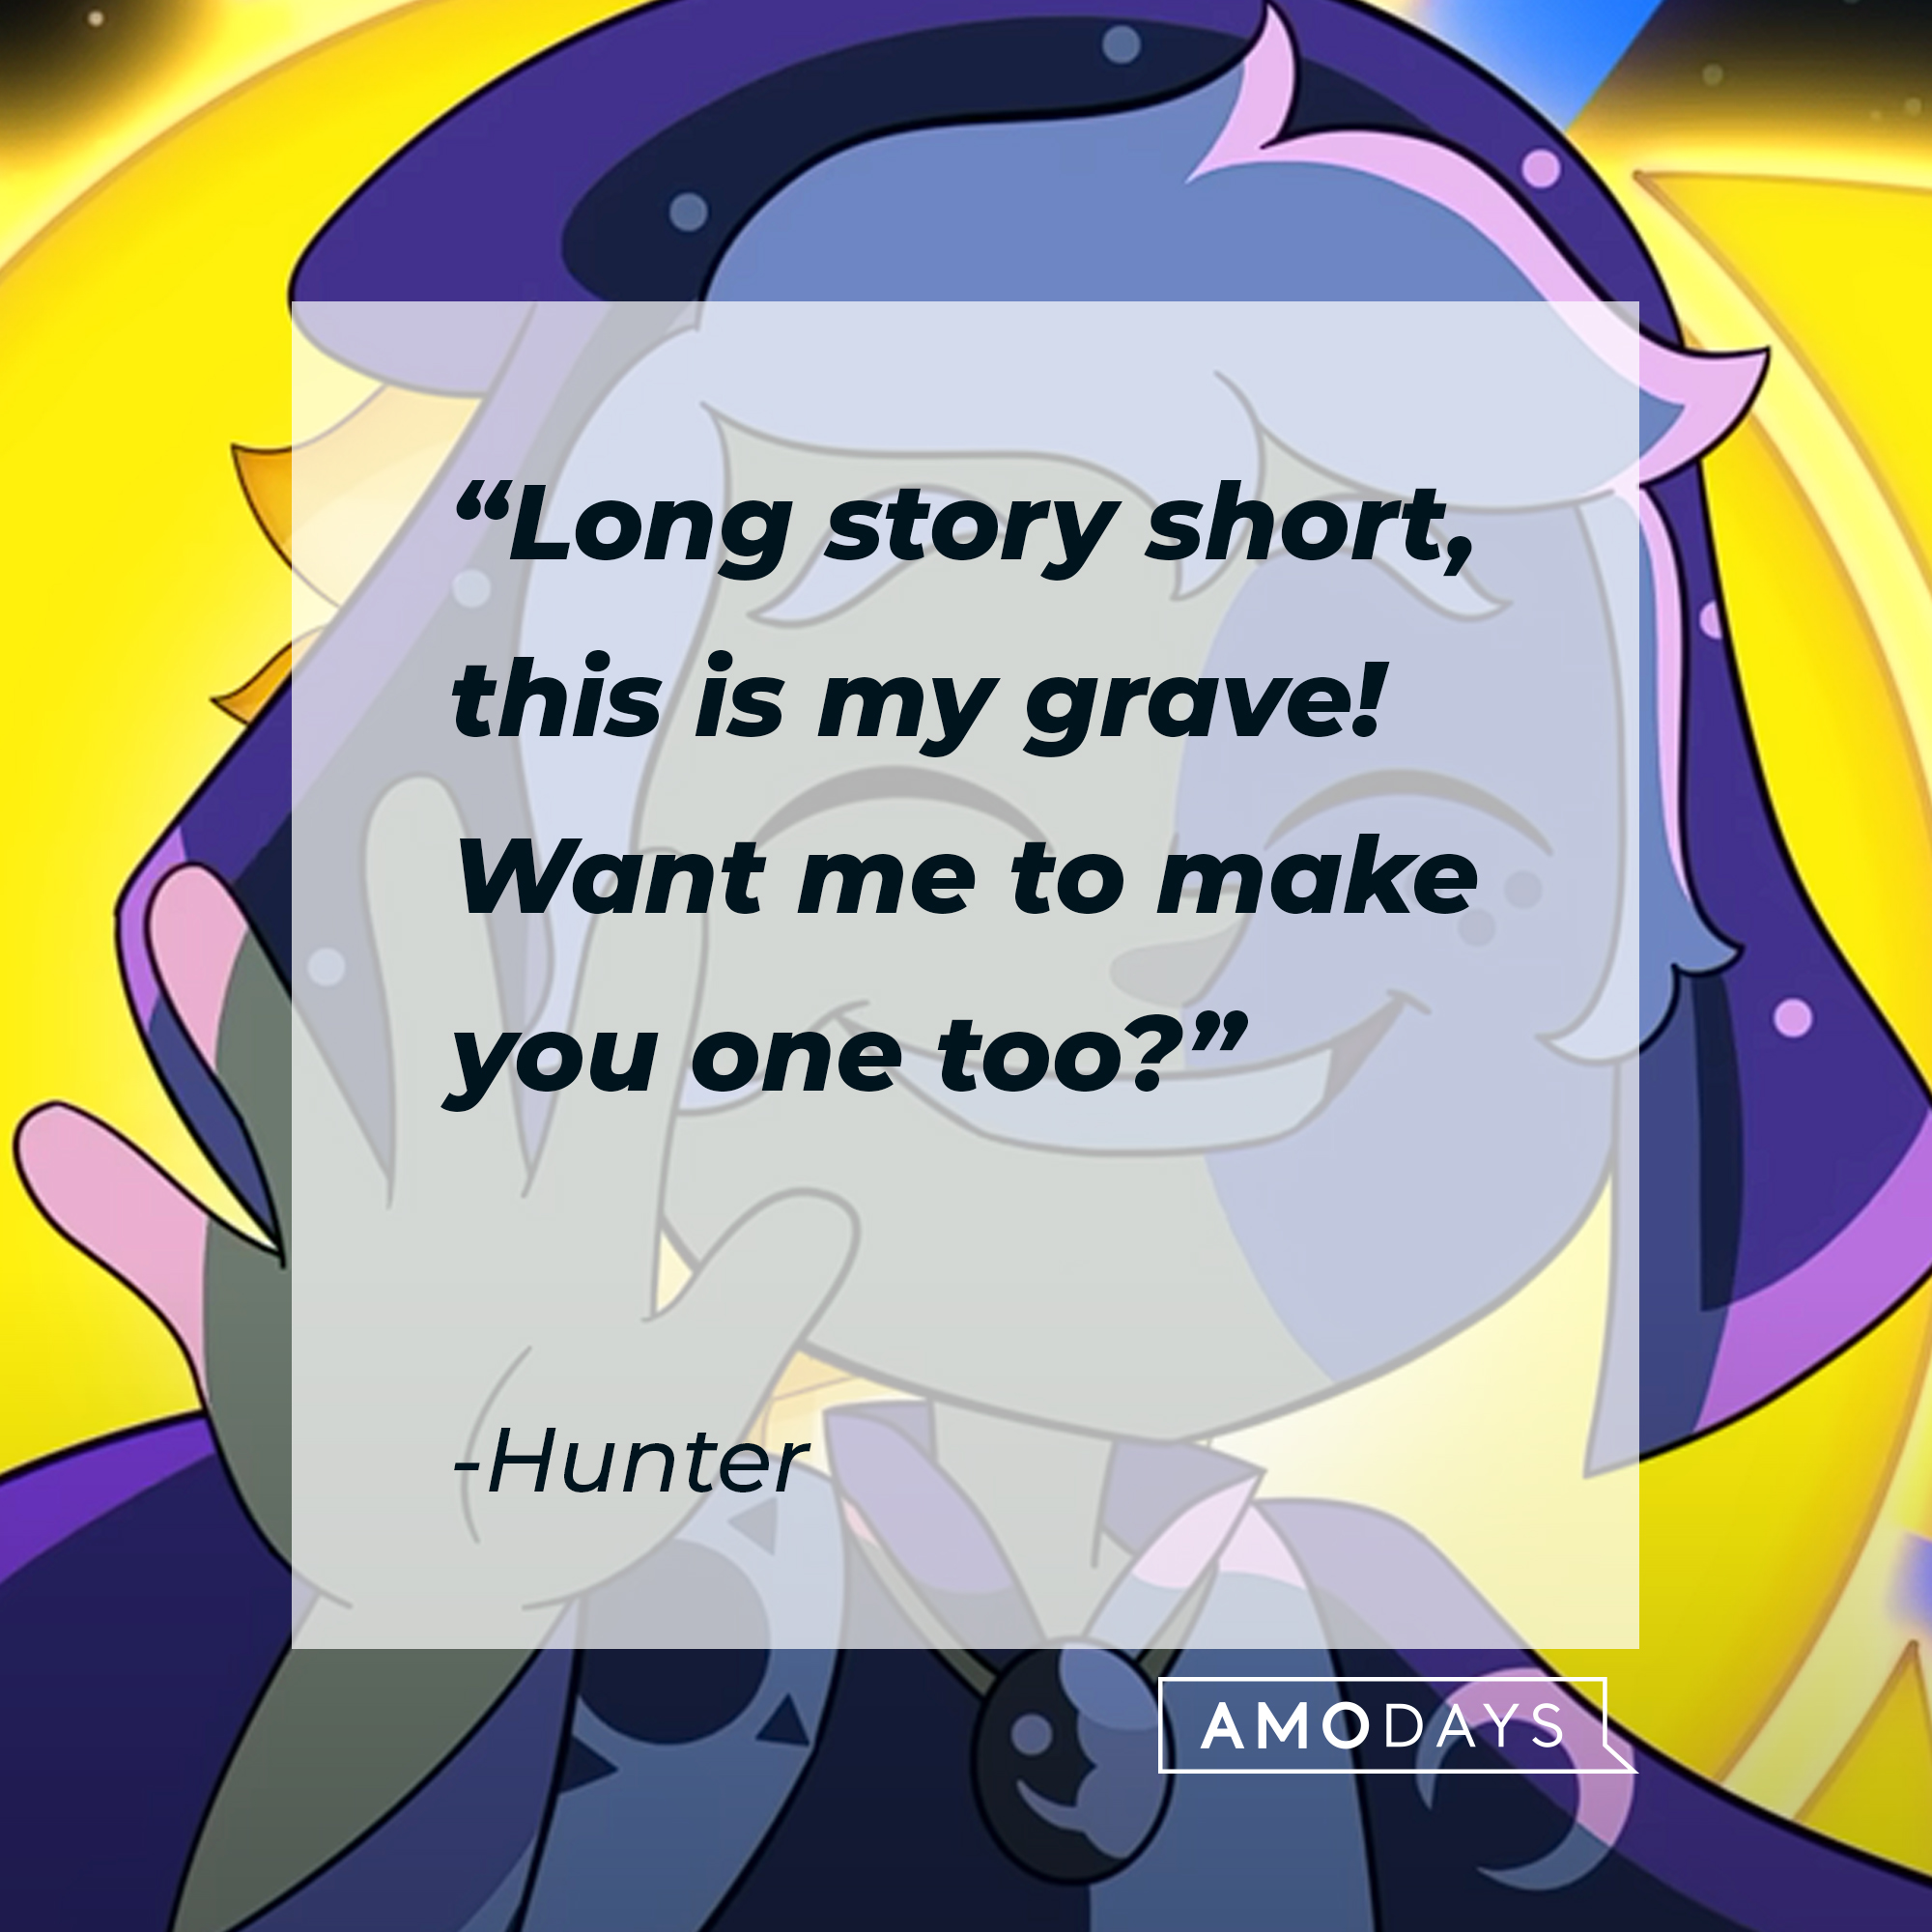 Hunter's quote: “Long story short, this is my grave! Want me to make you one too?” | Source: youtube.com/disneychannel